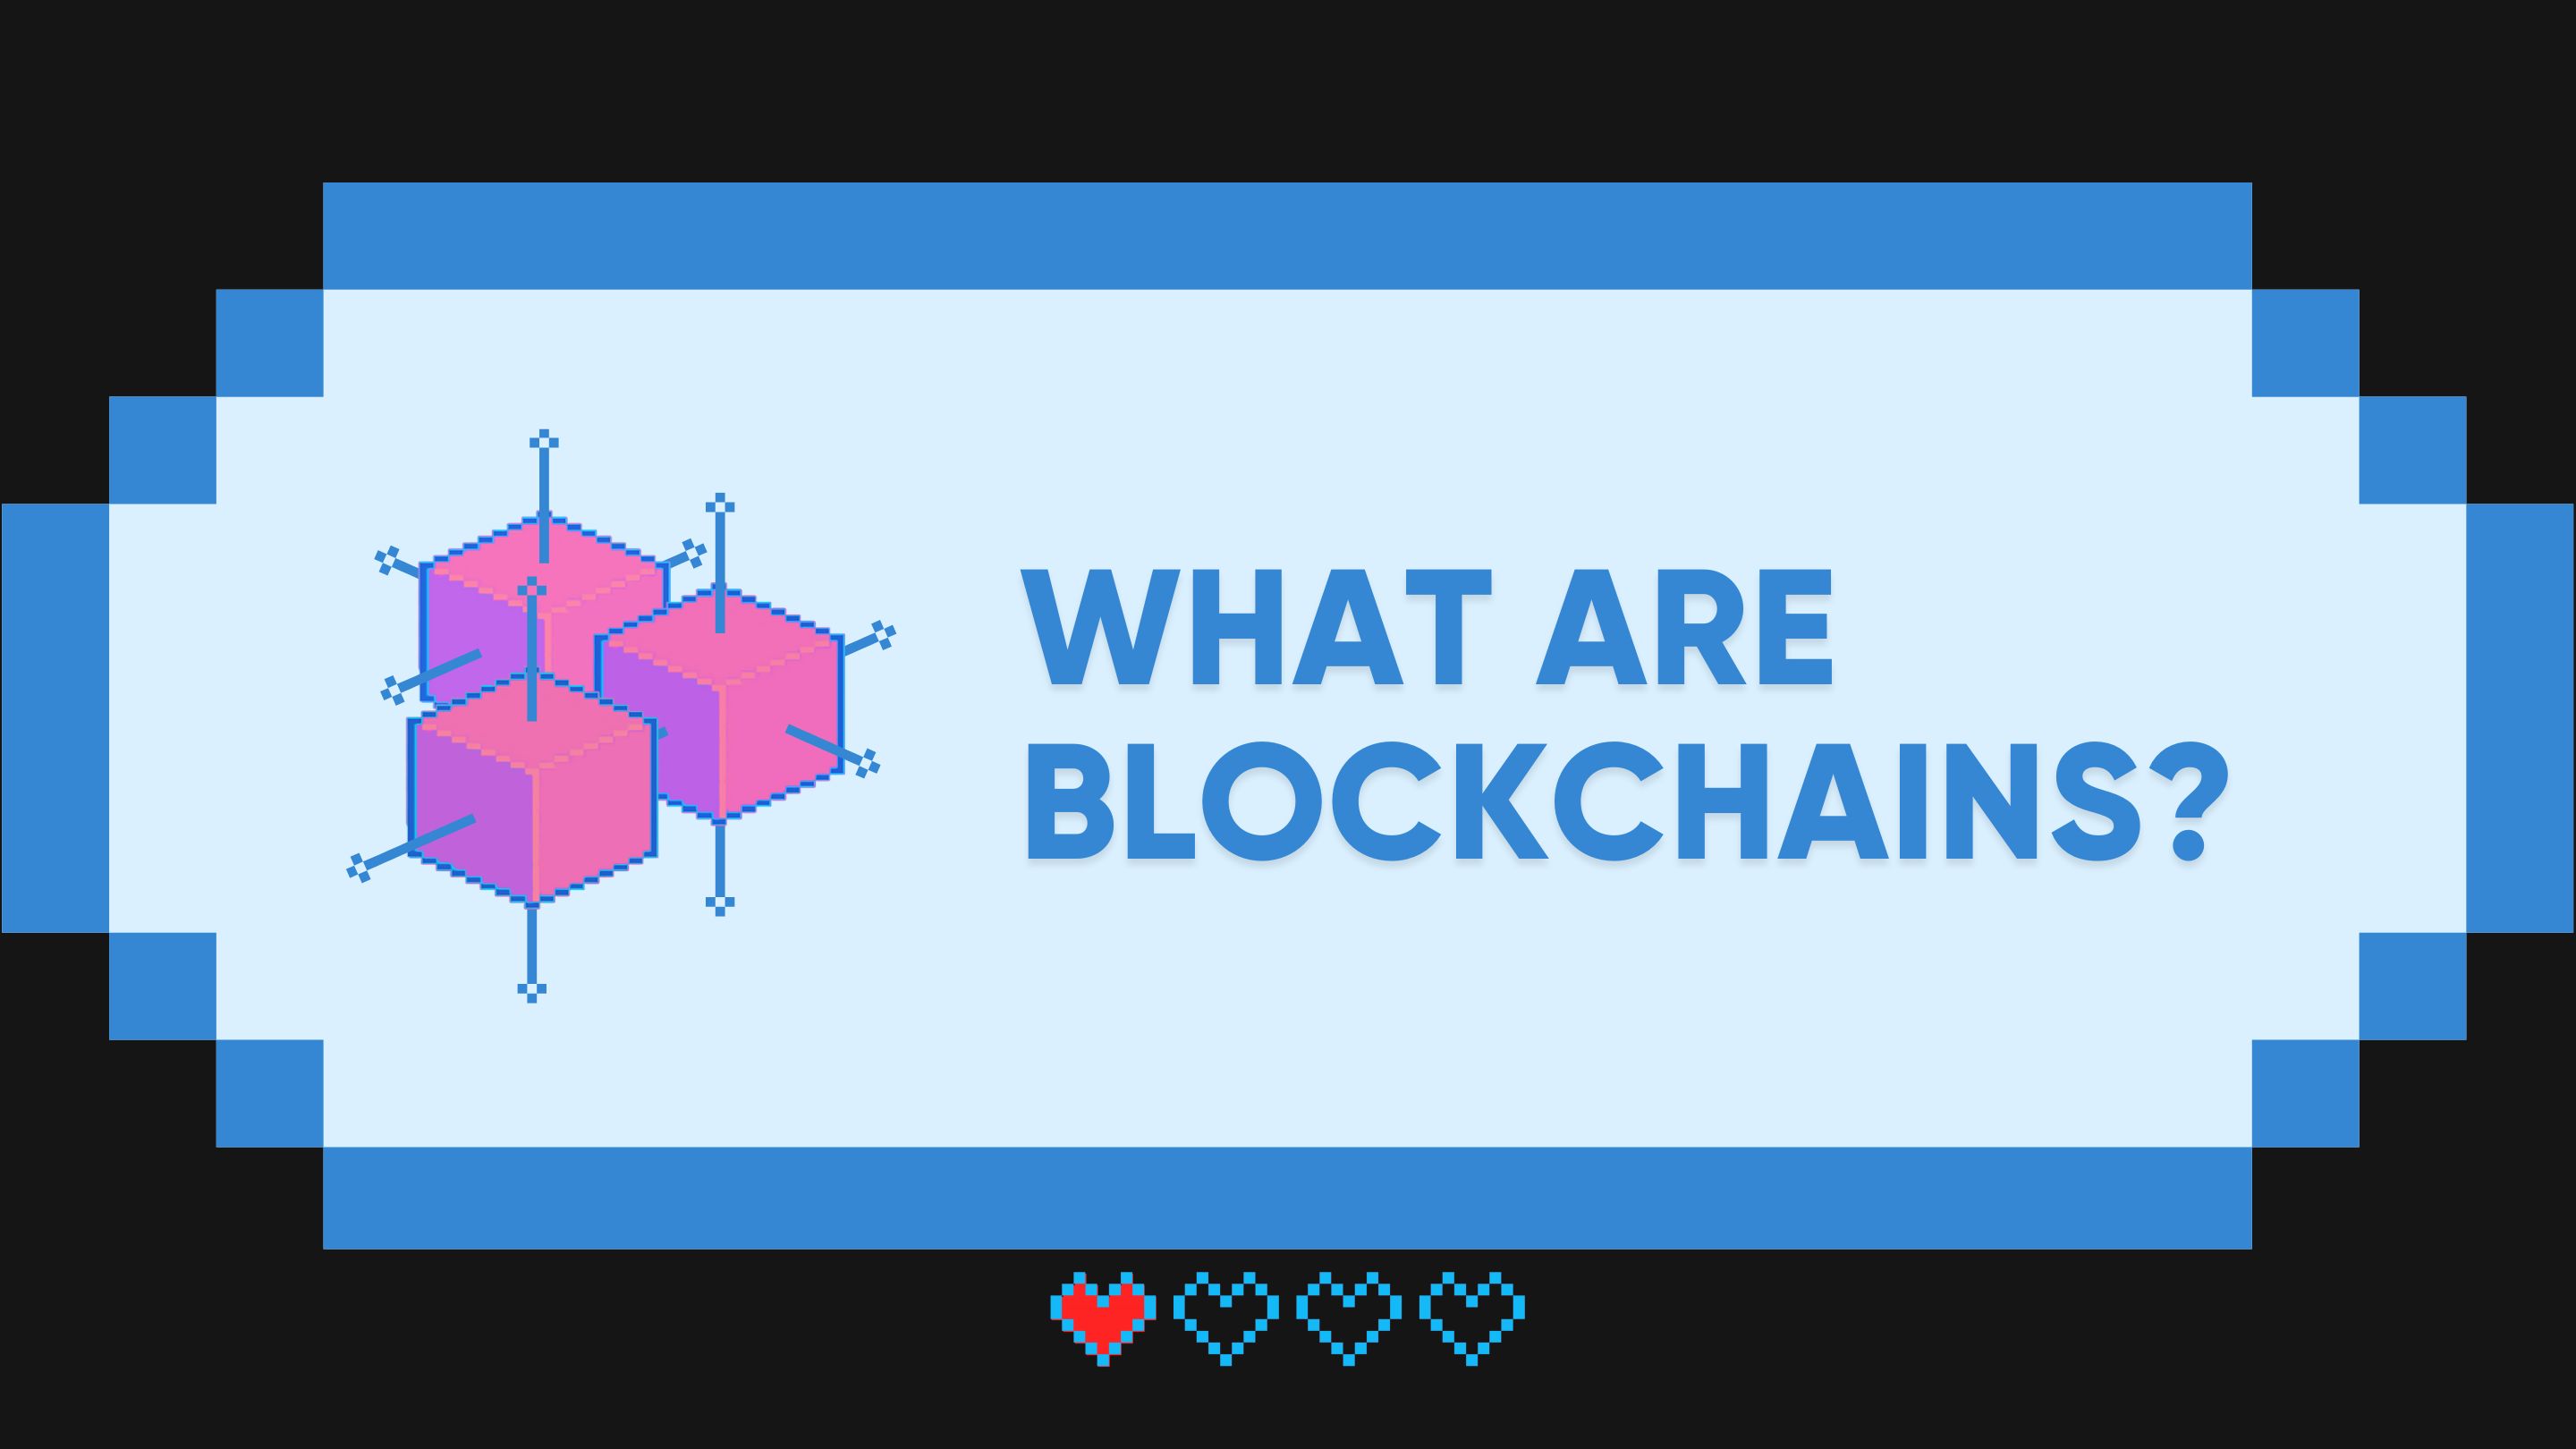 What are Blockchains?